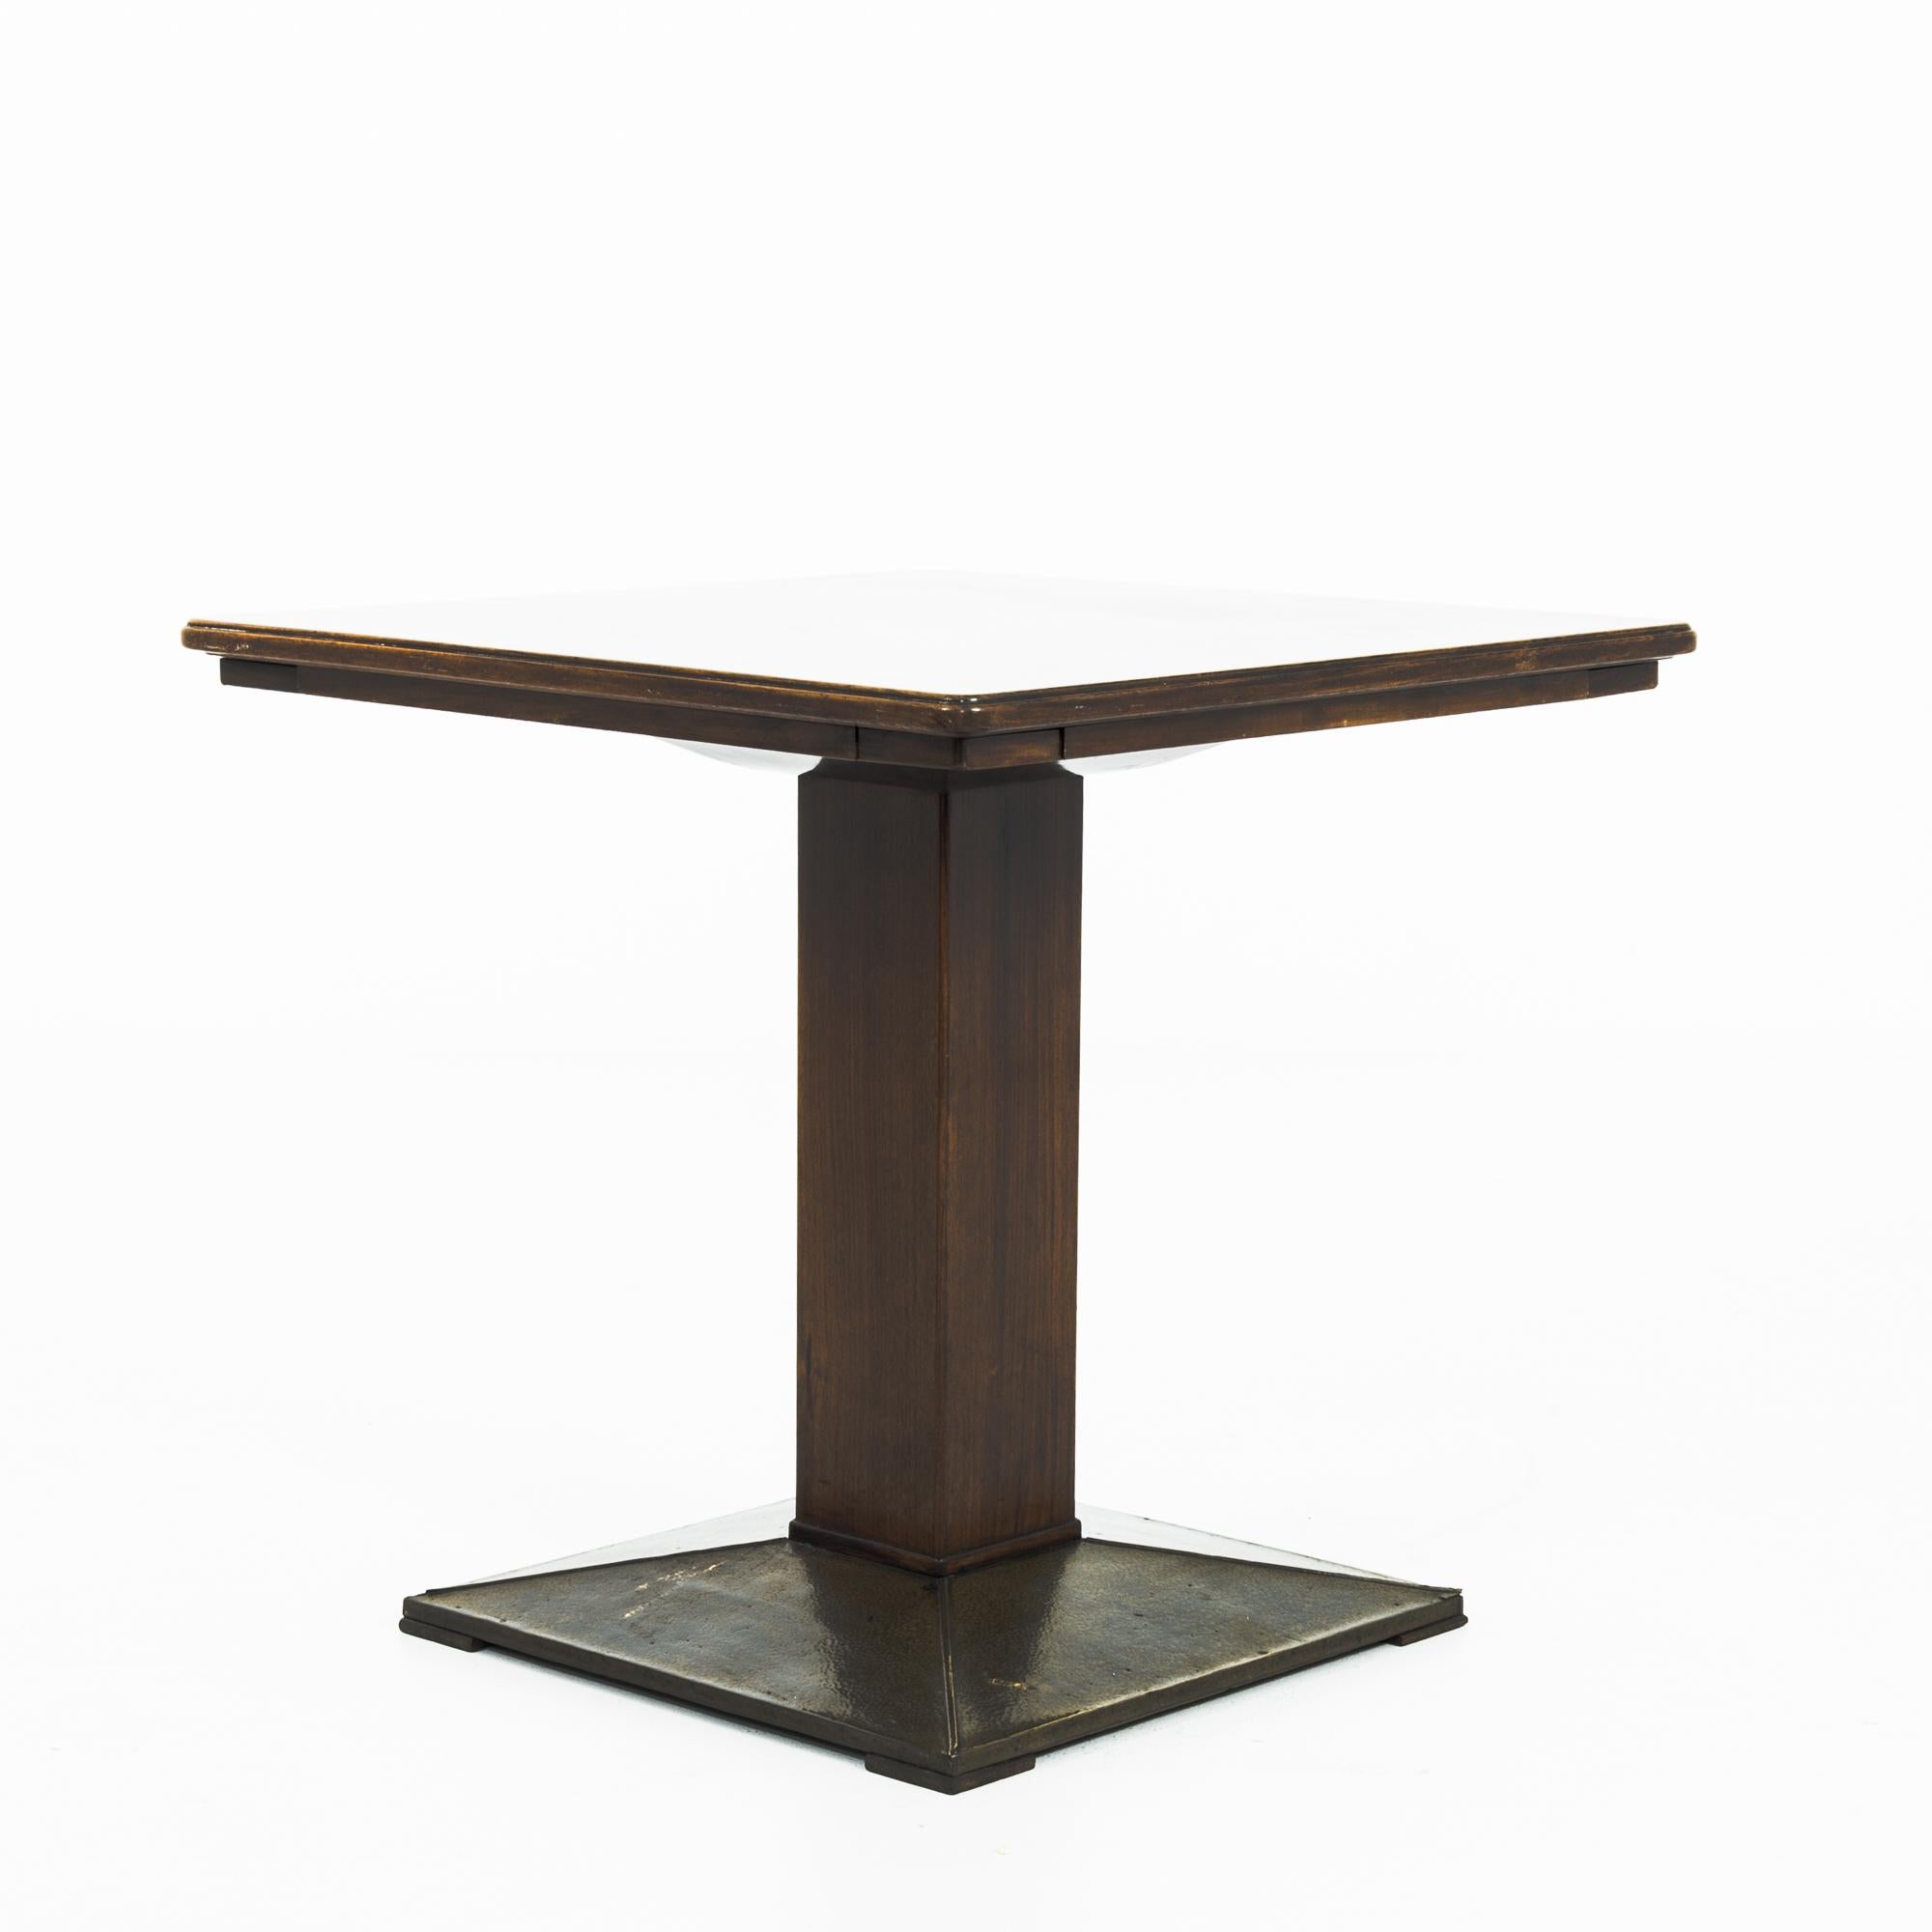 Early 20th Century 1920s Czech Wooden Pedestal Table